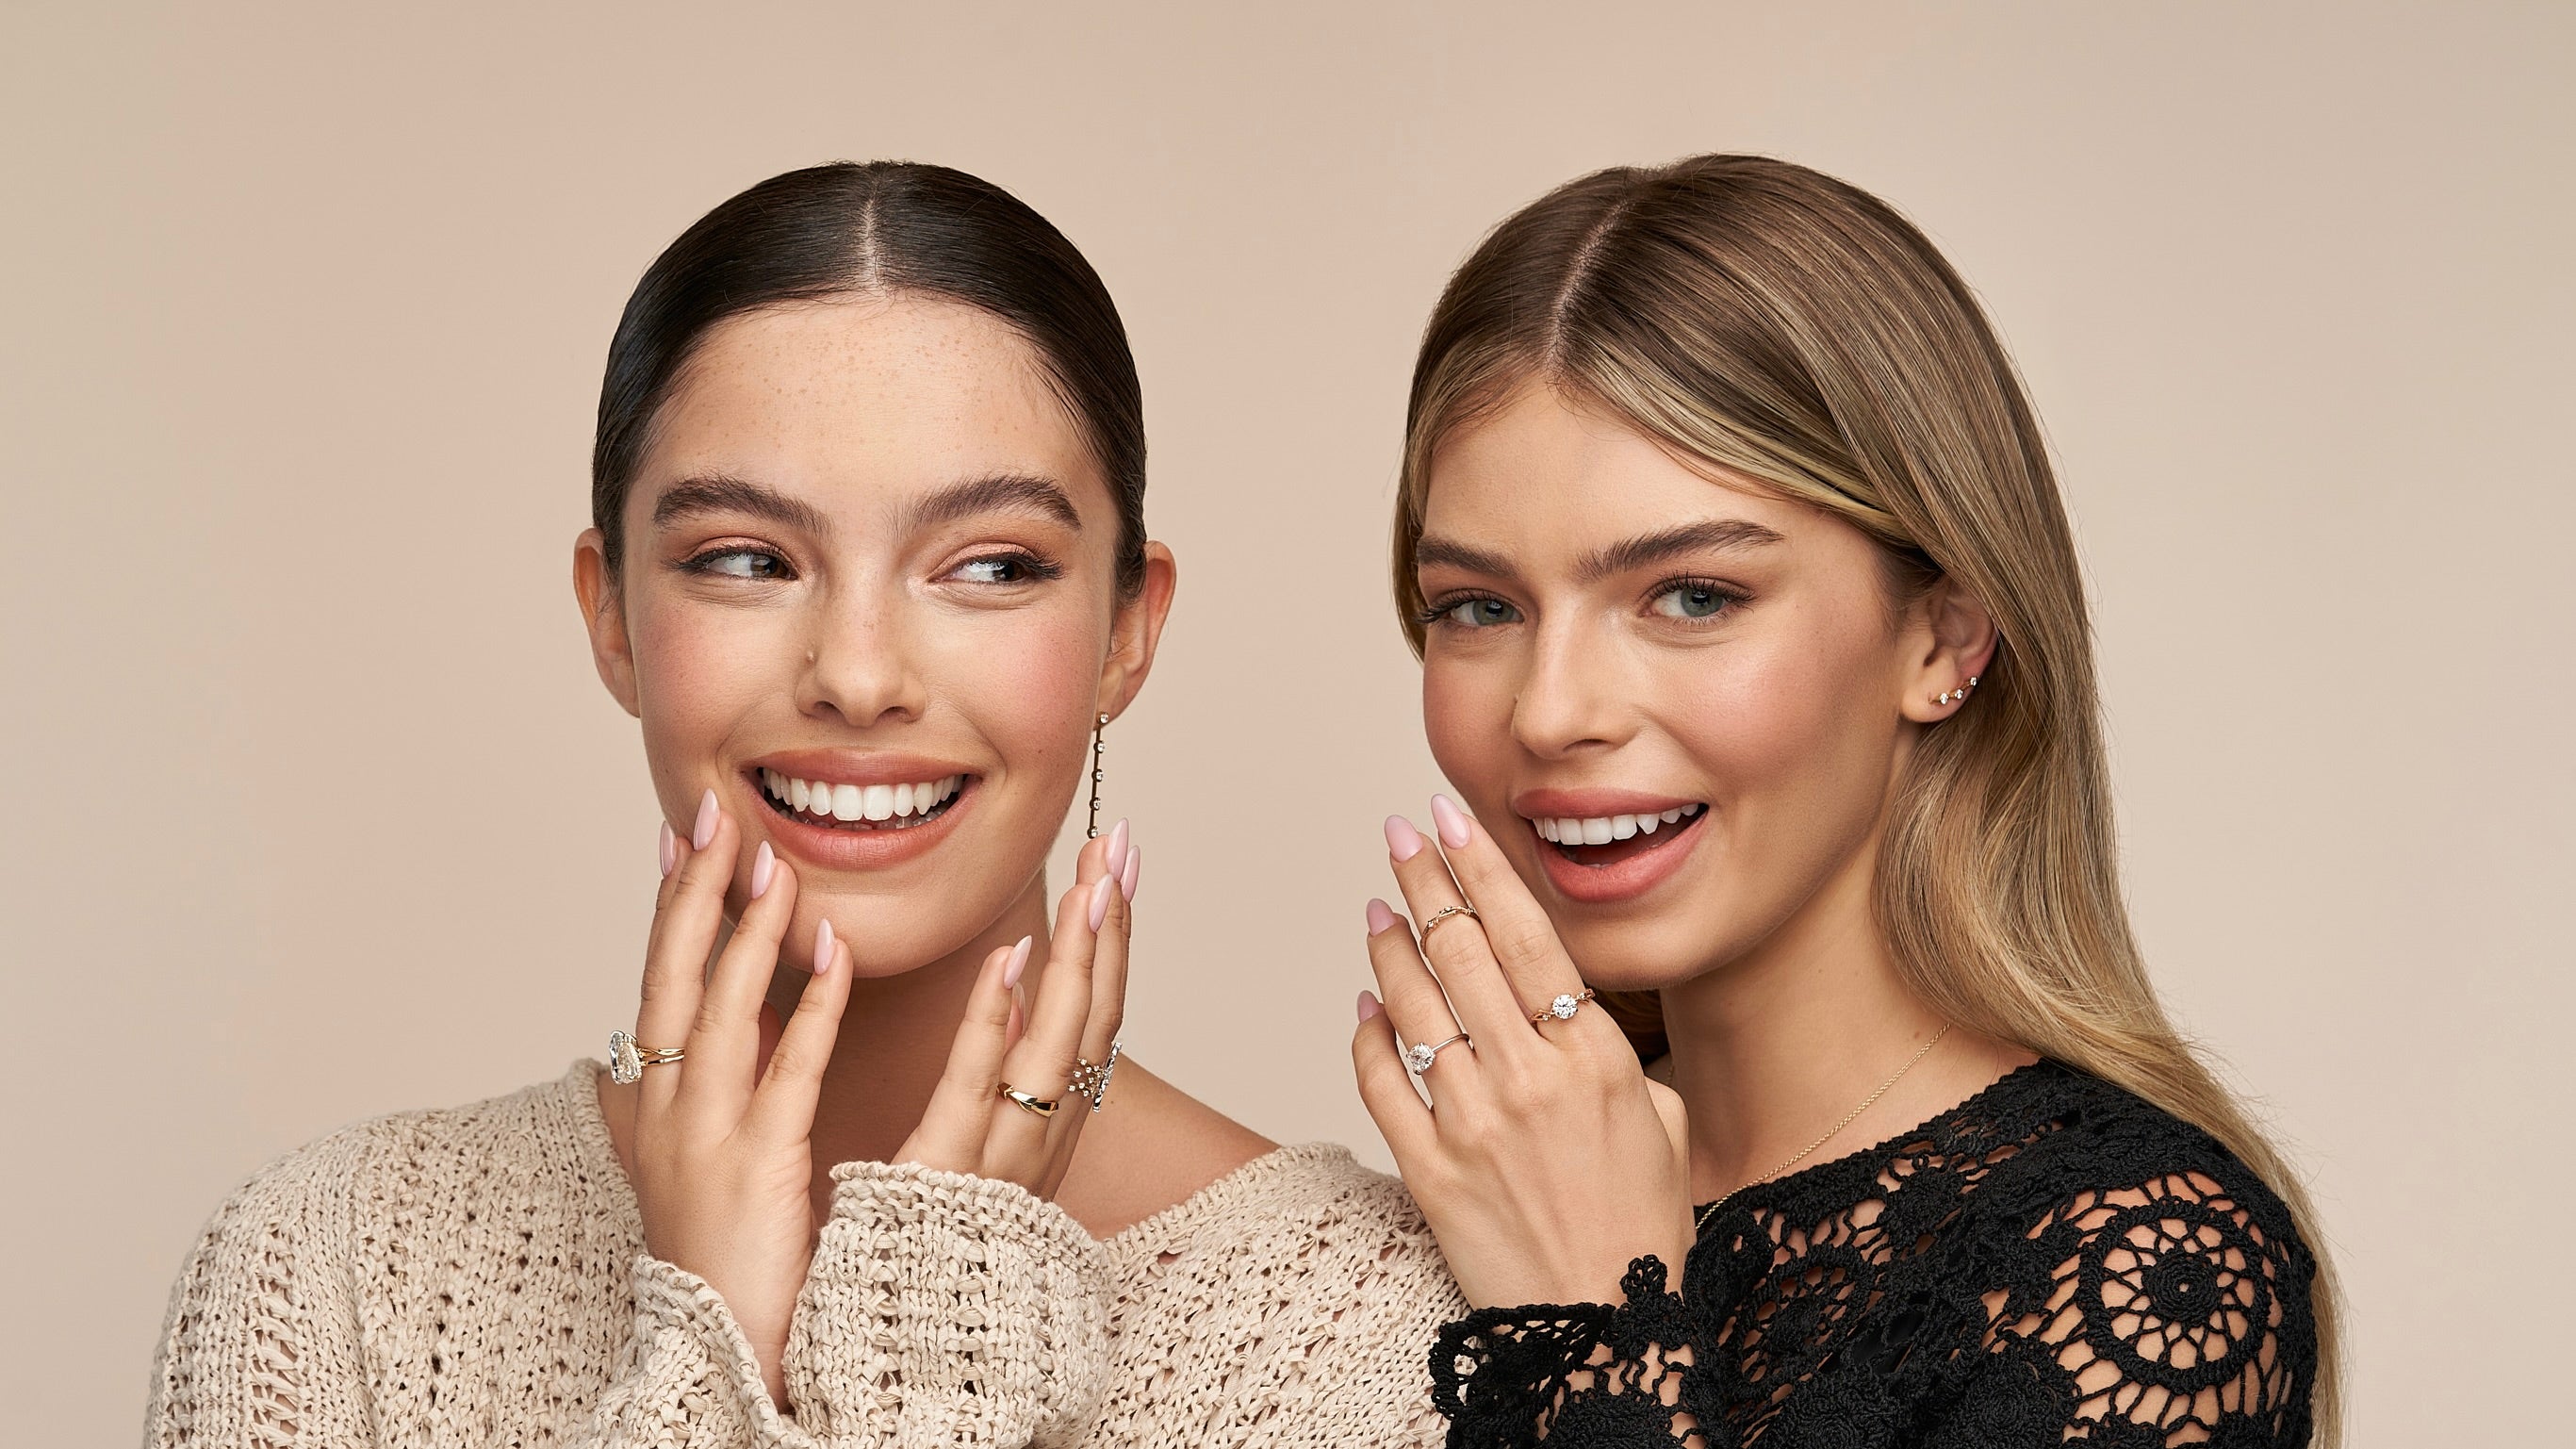 Budget-Savvy Bling: How to Choose a High-Quality Engagement Ring Without Breaking the Bank